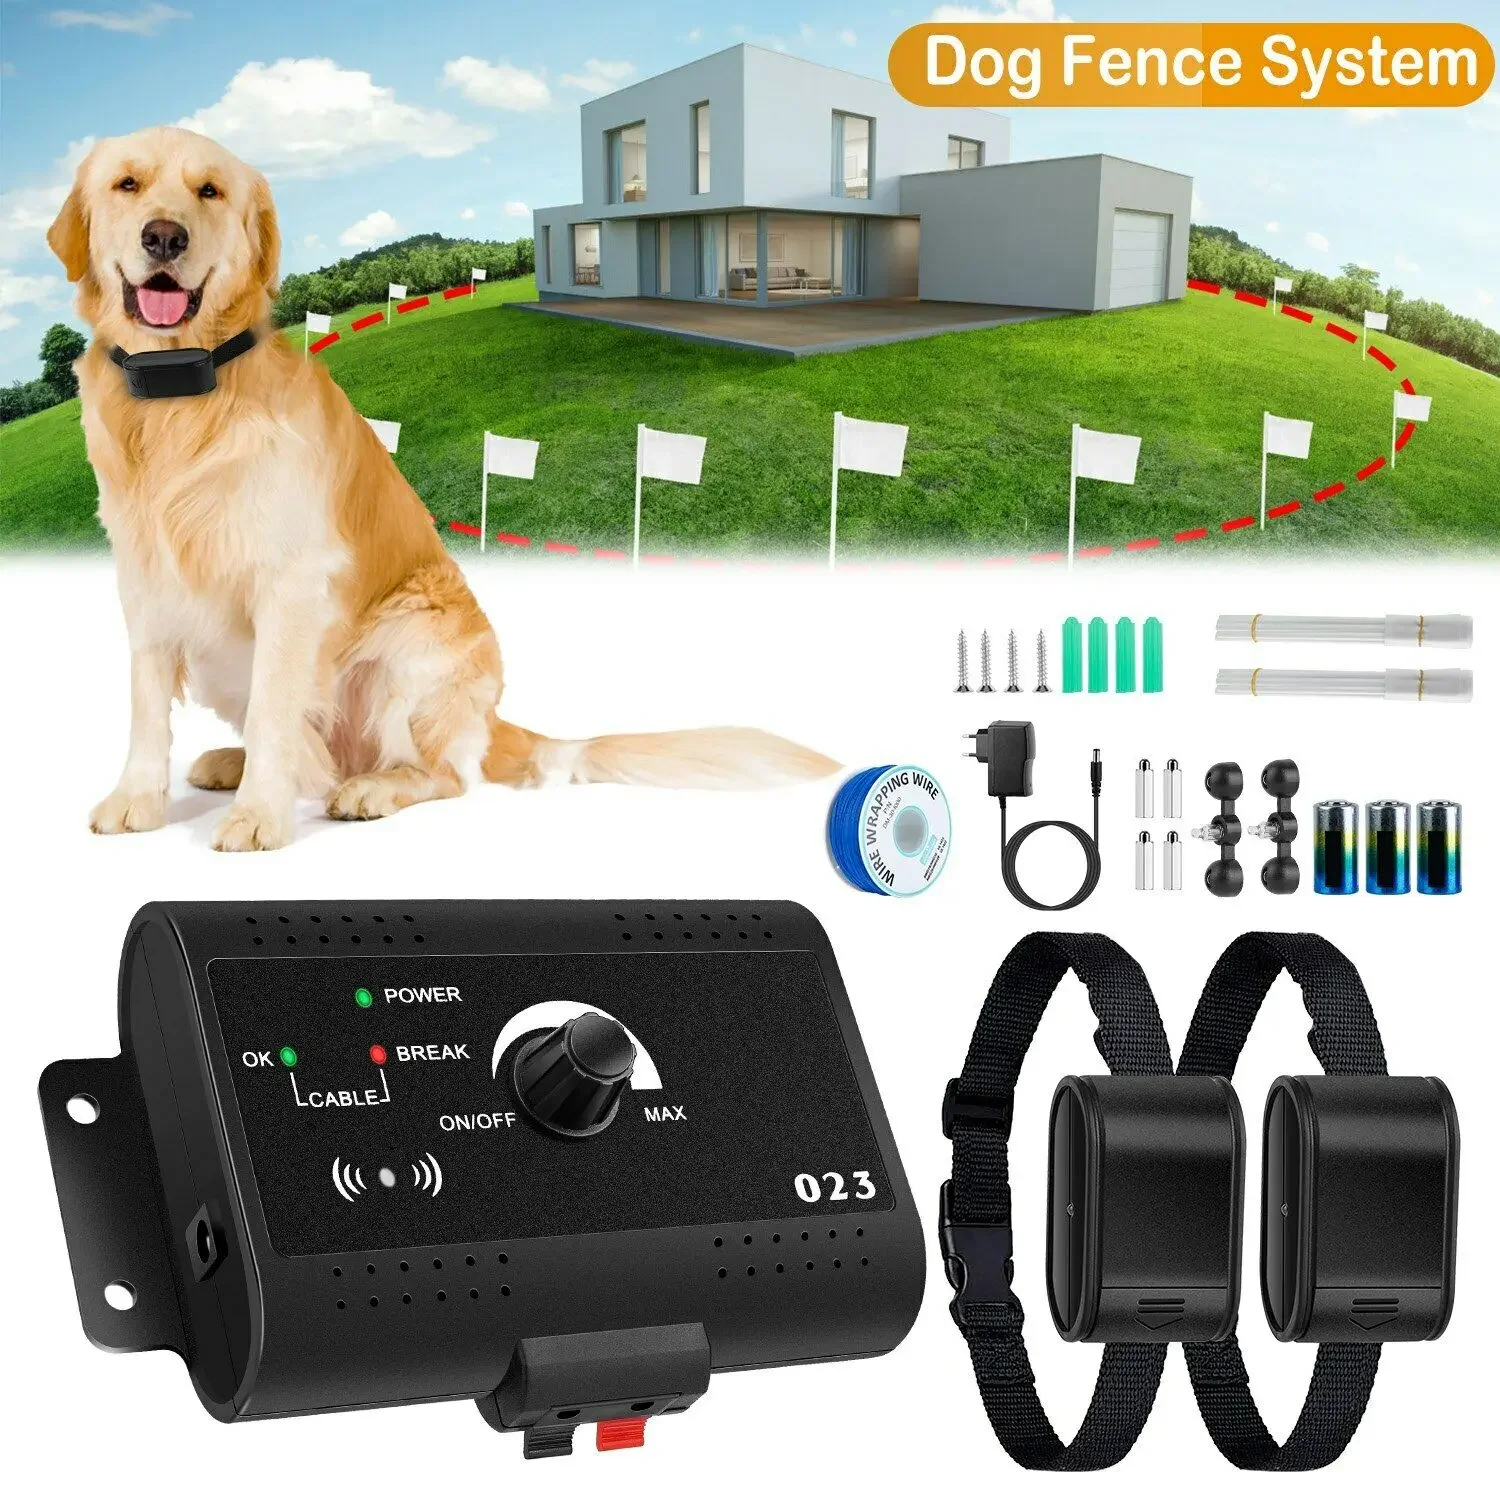 

Dog Fence Containment System Pet Dog Remote Transmitter Training Collar Electric Shock Sound Collar Waterproof Pet Dog Supplies